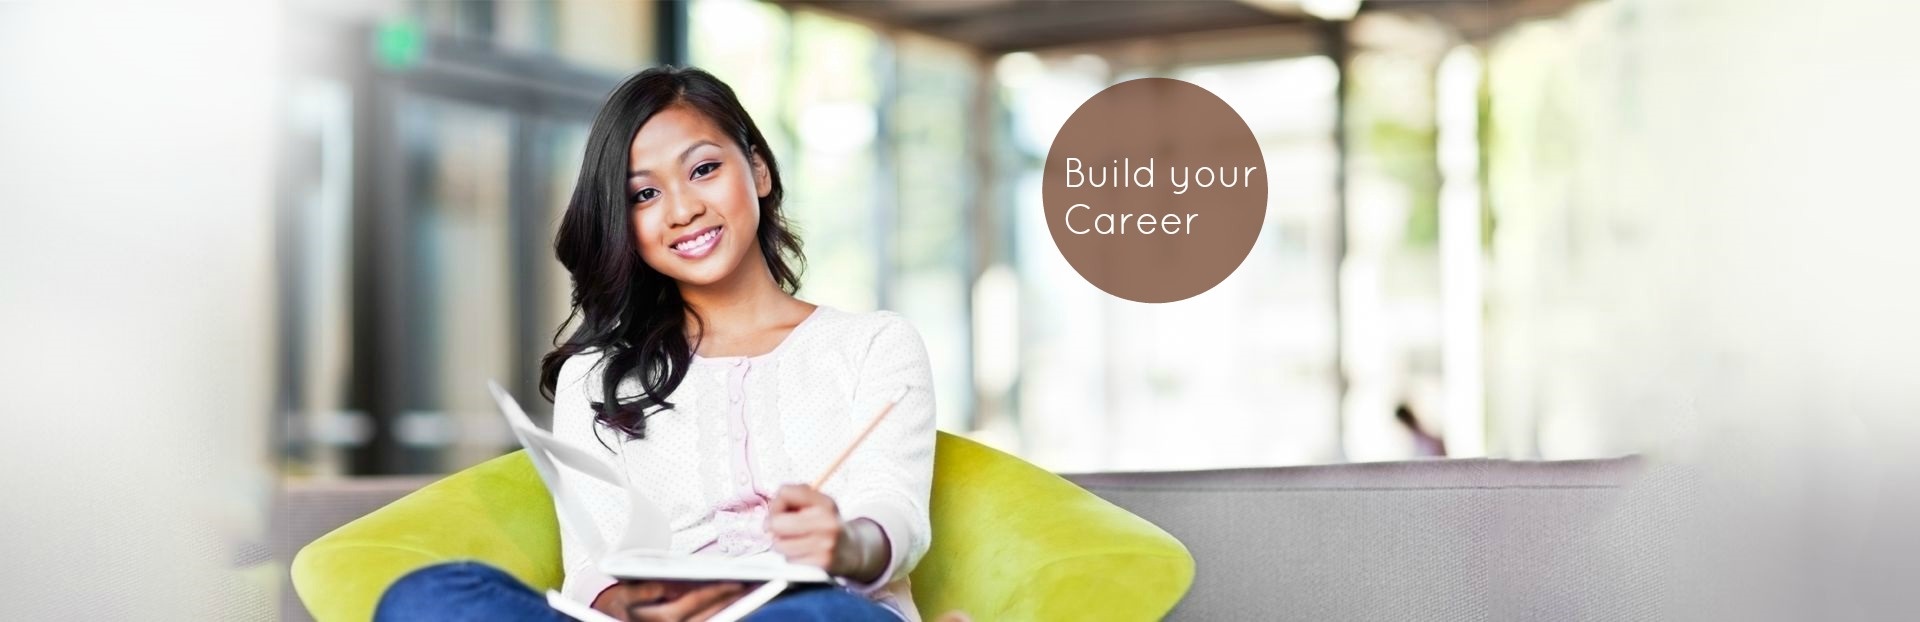 Build your career 